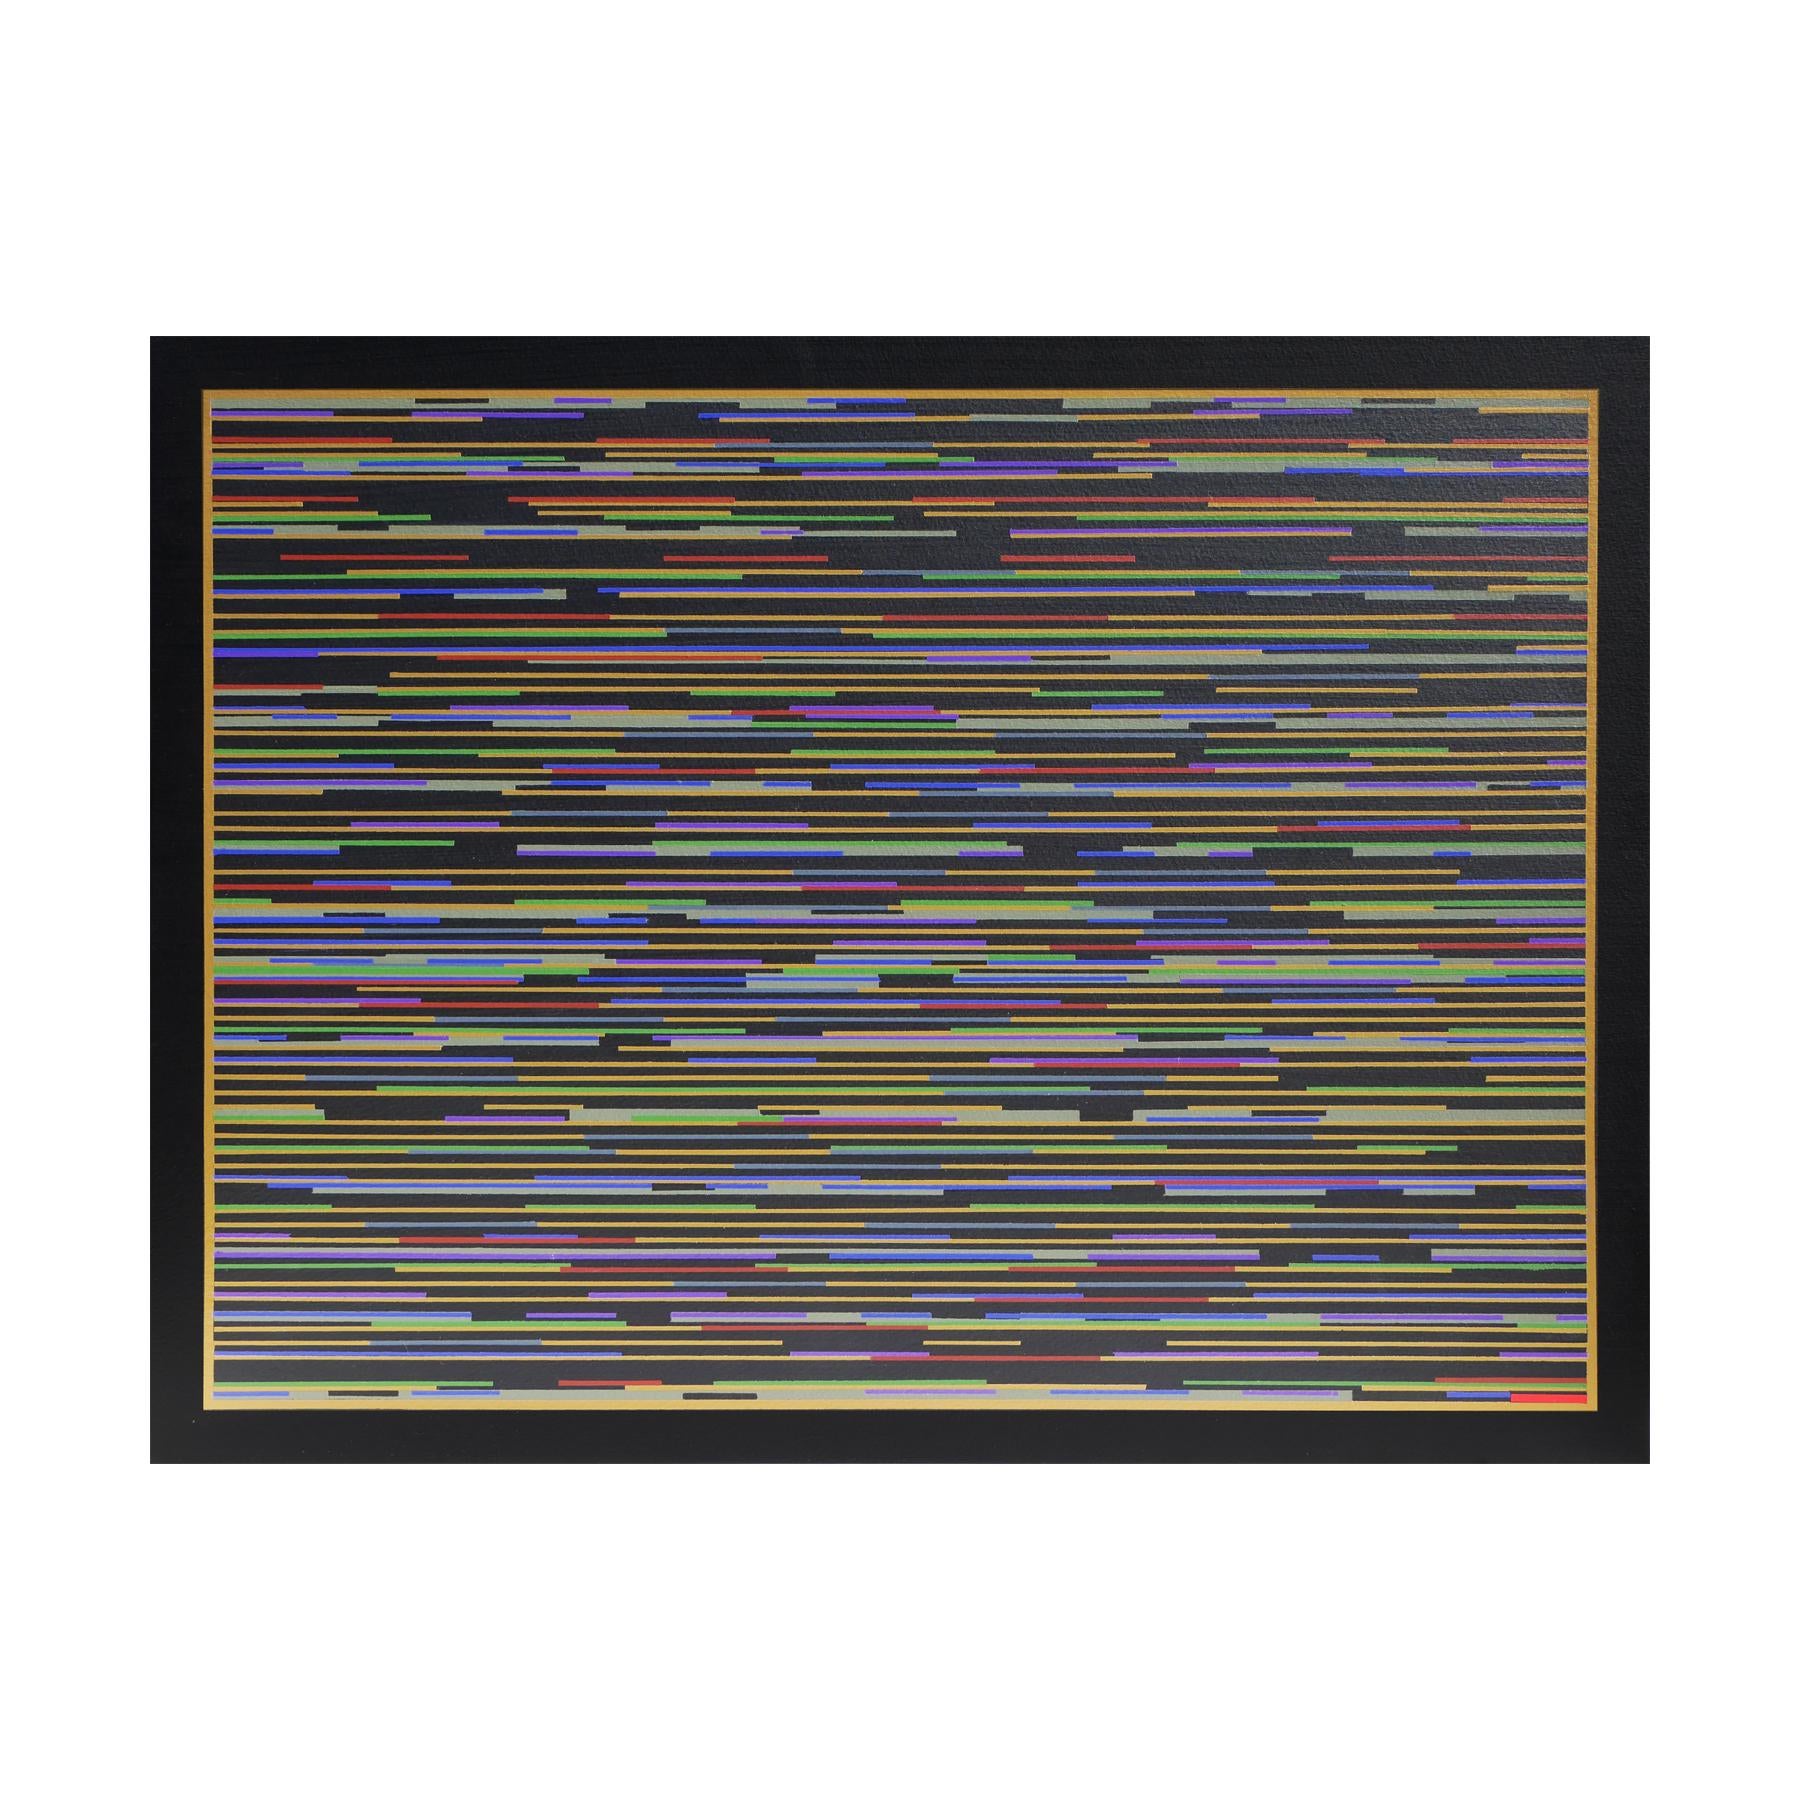 Contemporary abstract geometric painting by artist Mark Byckowski. The work is featured in a series of paintings on a rag surface watercolor board. The work features horizontal lines with a variety of vivid colors of red, green, blue, and yellow